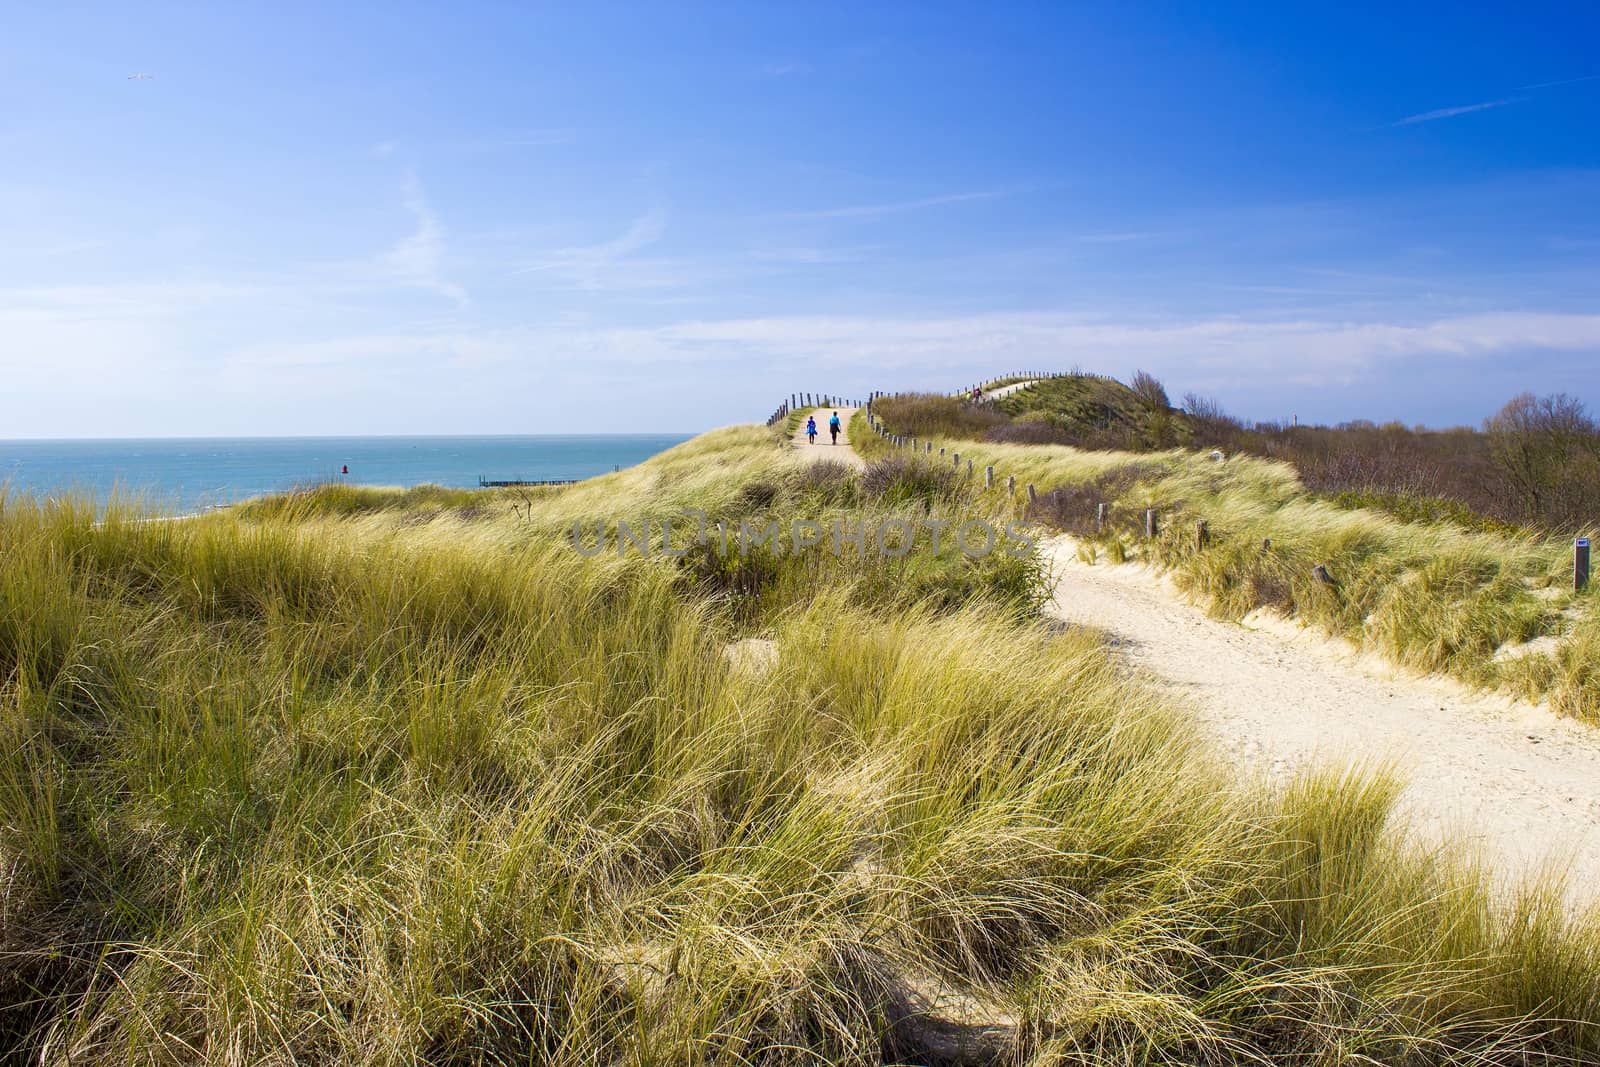 Path trough the dunes, Zoutelande, the Netherlands by miradrozdowski